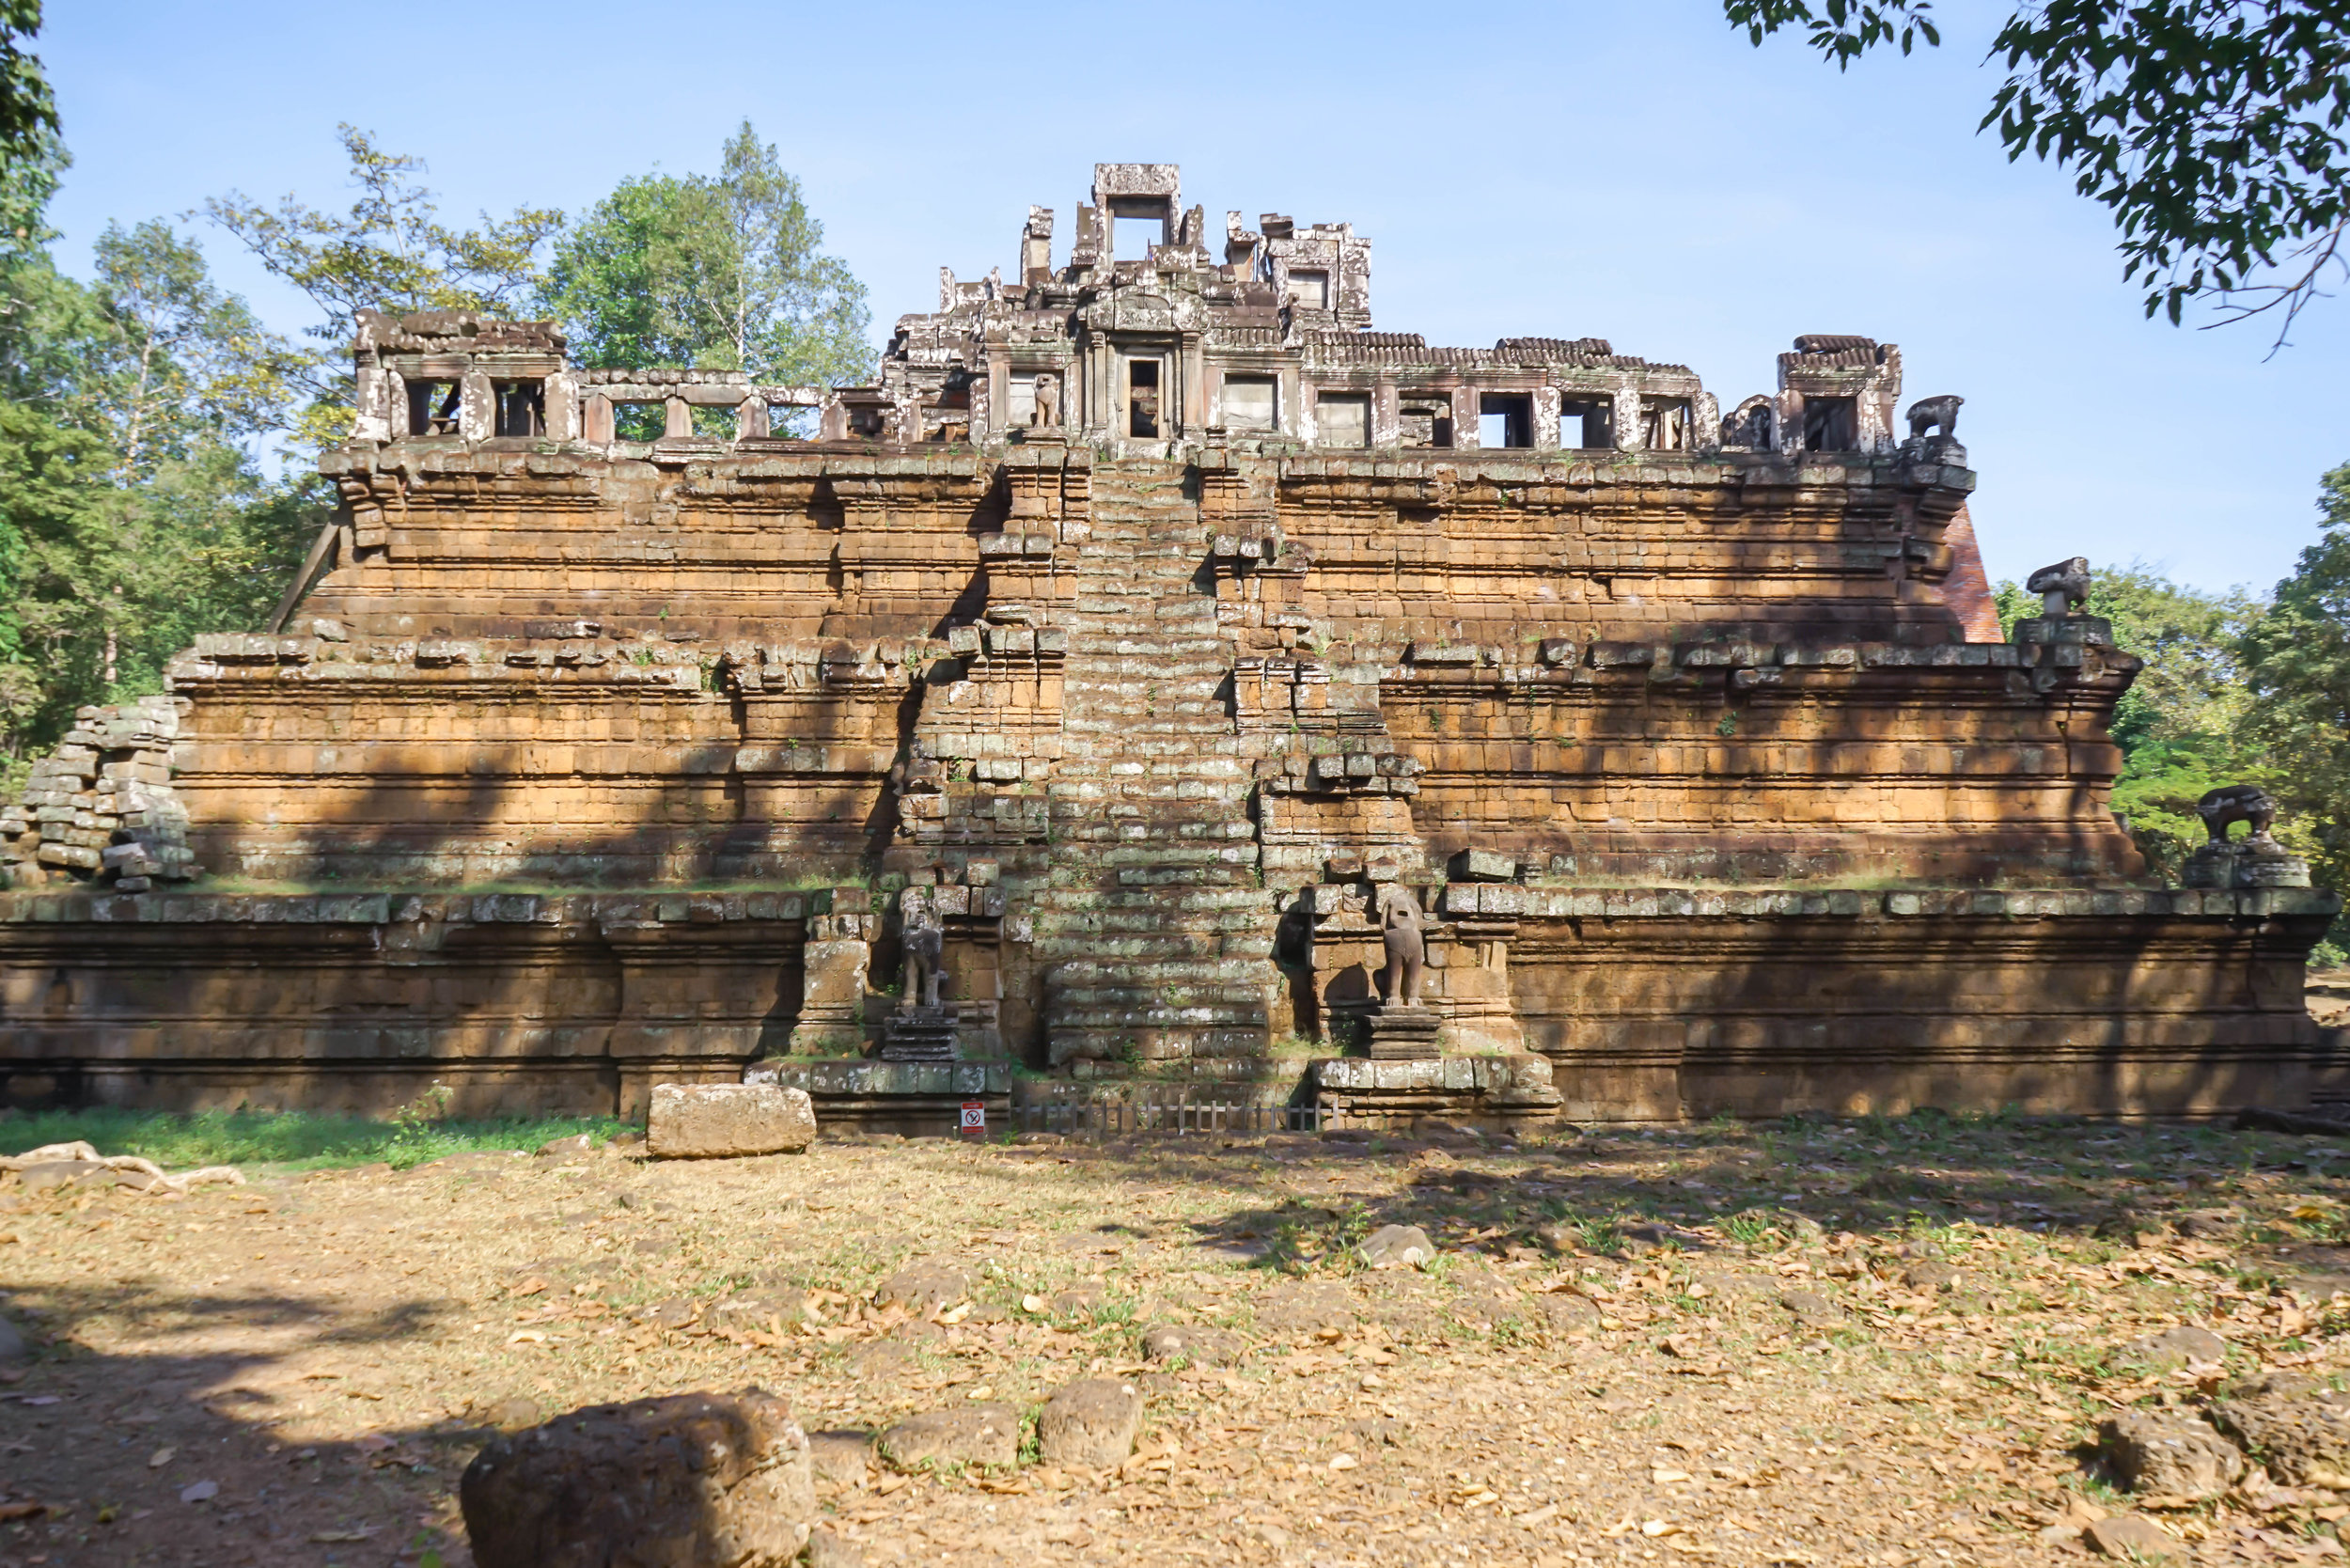 Guide to the Temples of Angkor Wat | Siem Reap | Cambodia